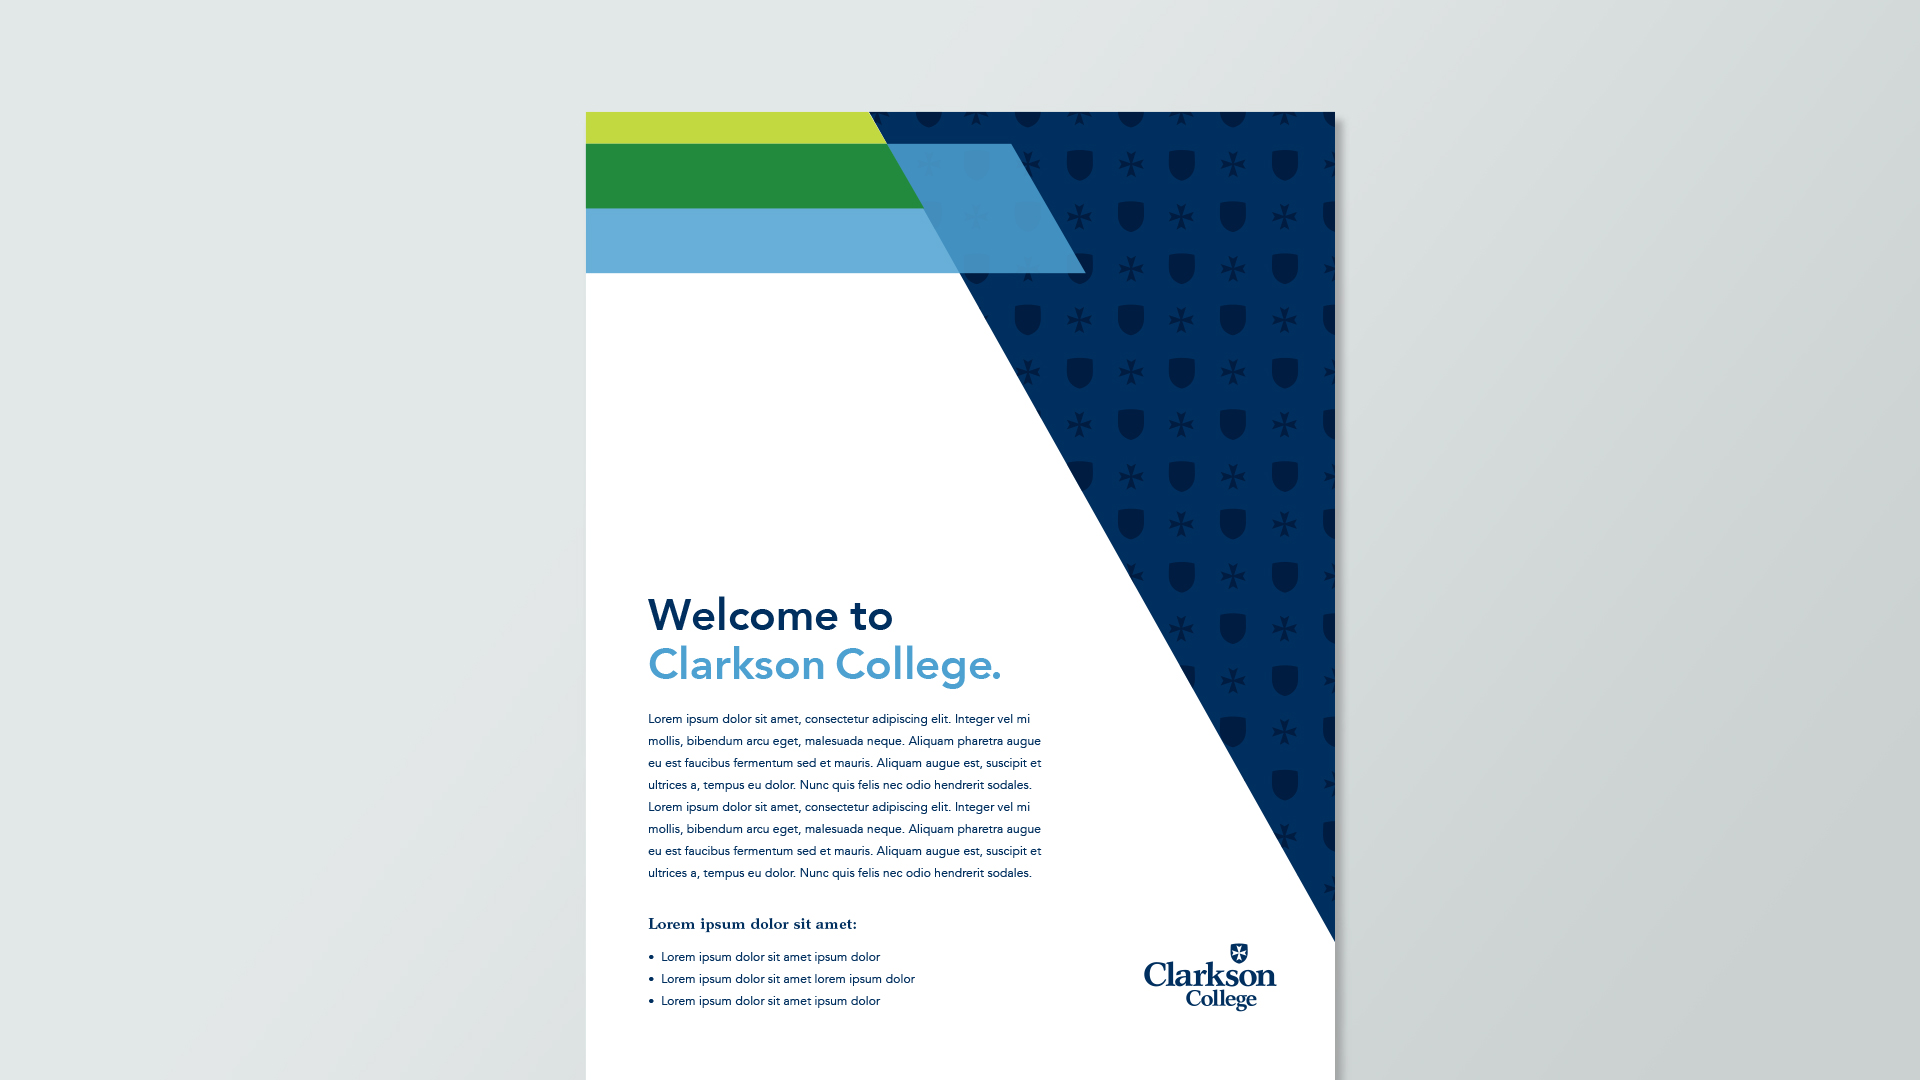 Clarkson College Design System: Collateral Design